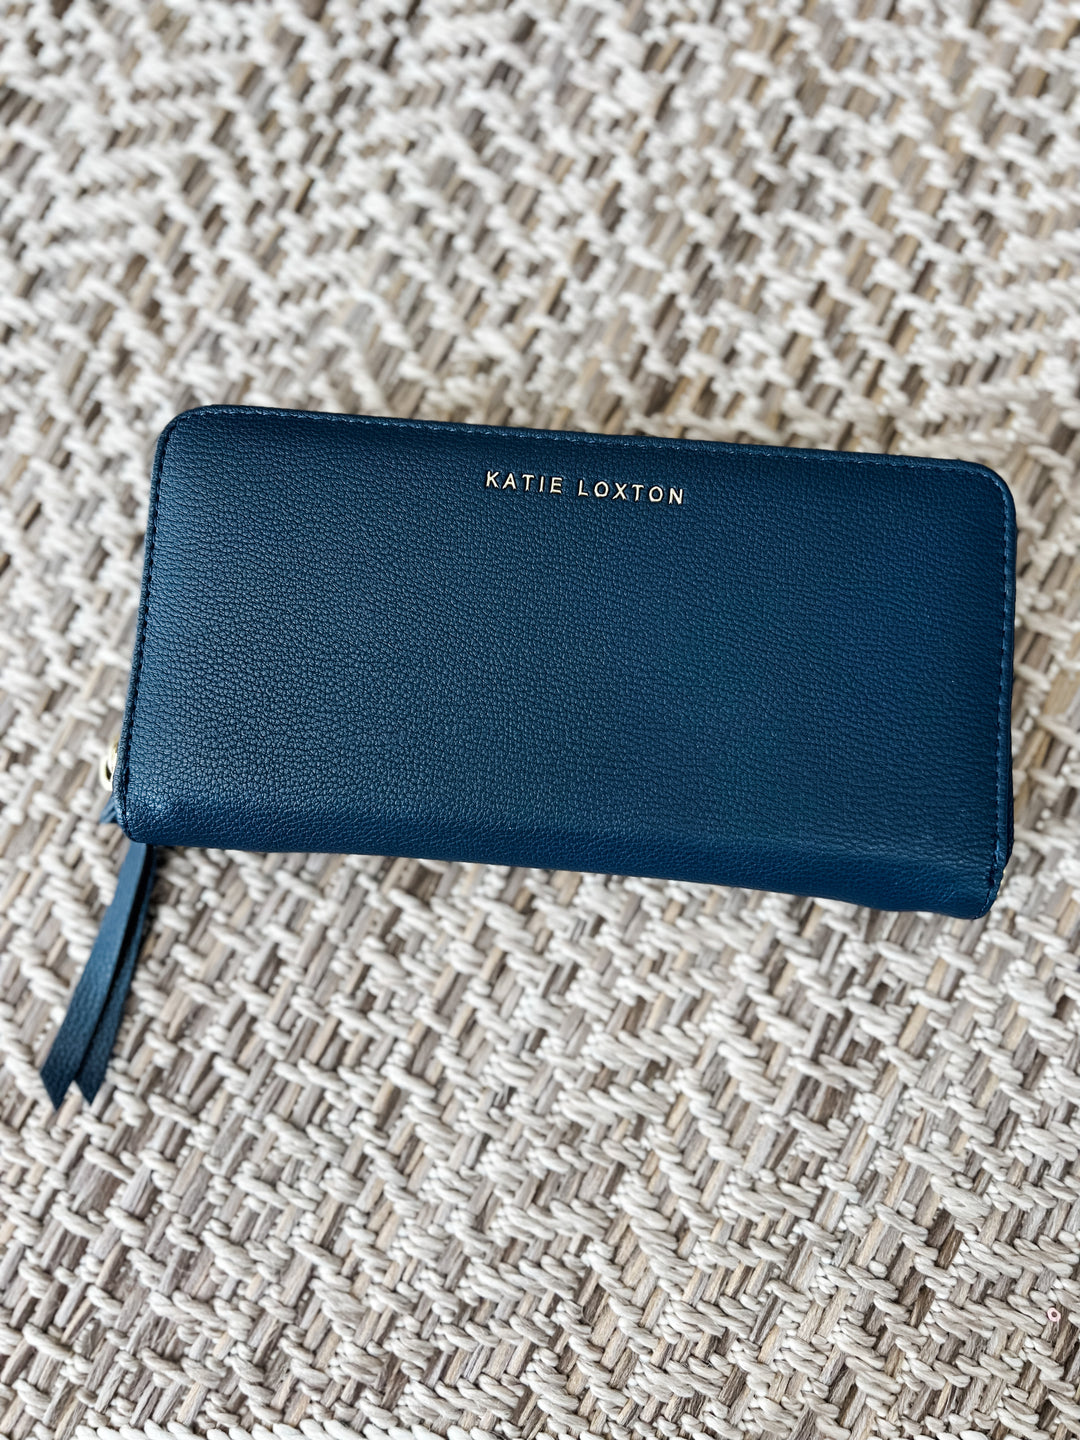 Isla Wallet - The Teal Antler Boutique